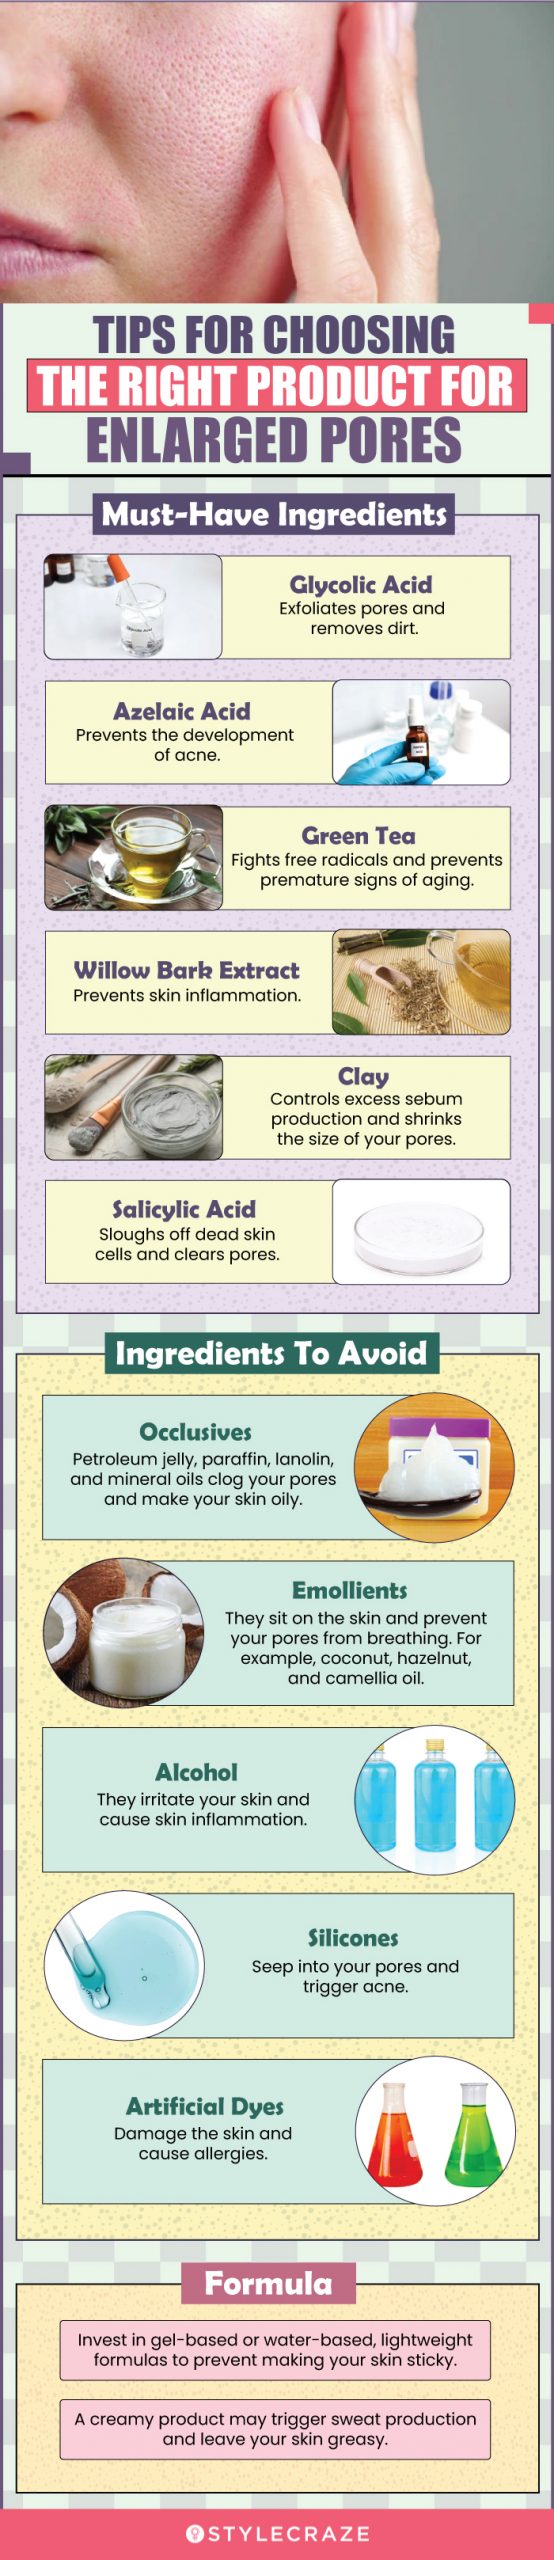 Tips For Choosing The Right Product For Enlarged Pores (infographic)